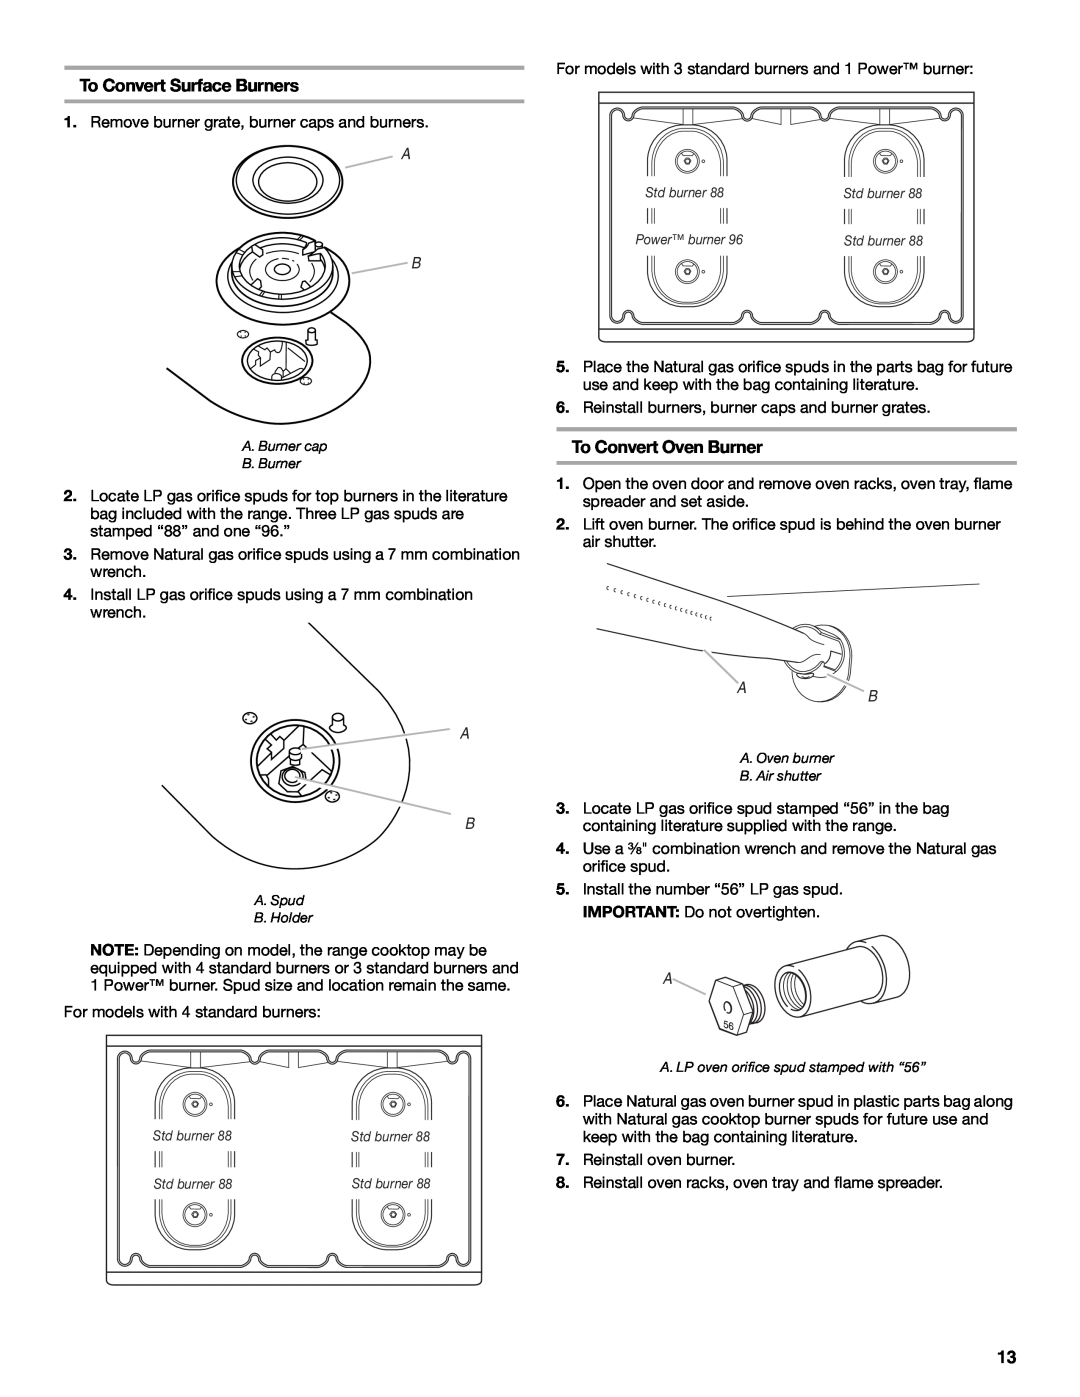 Amana W10130752B installation instructions To Convert Surface Burners, To Convert Oven Burner 